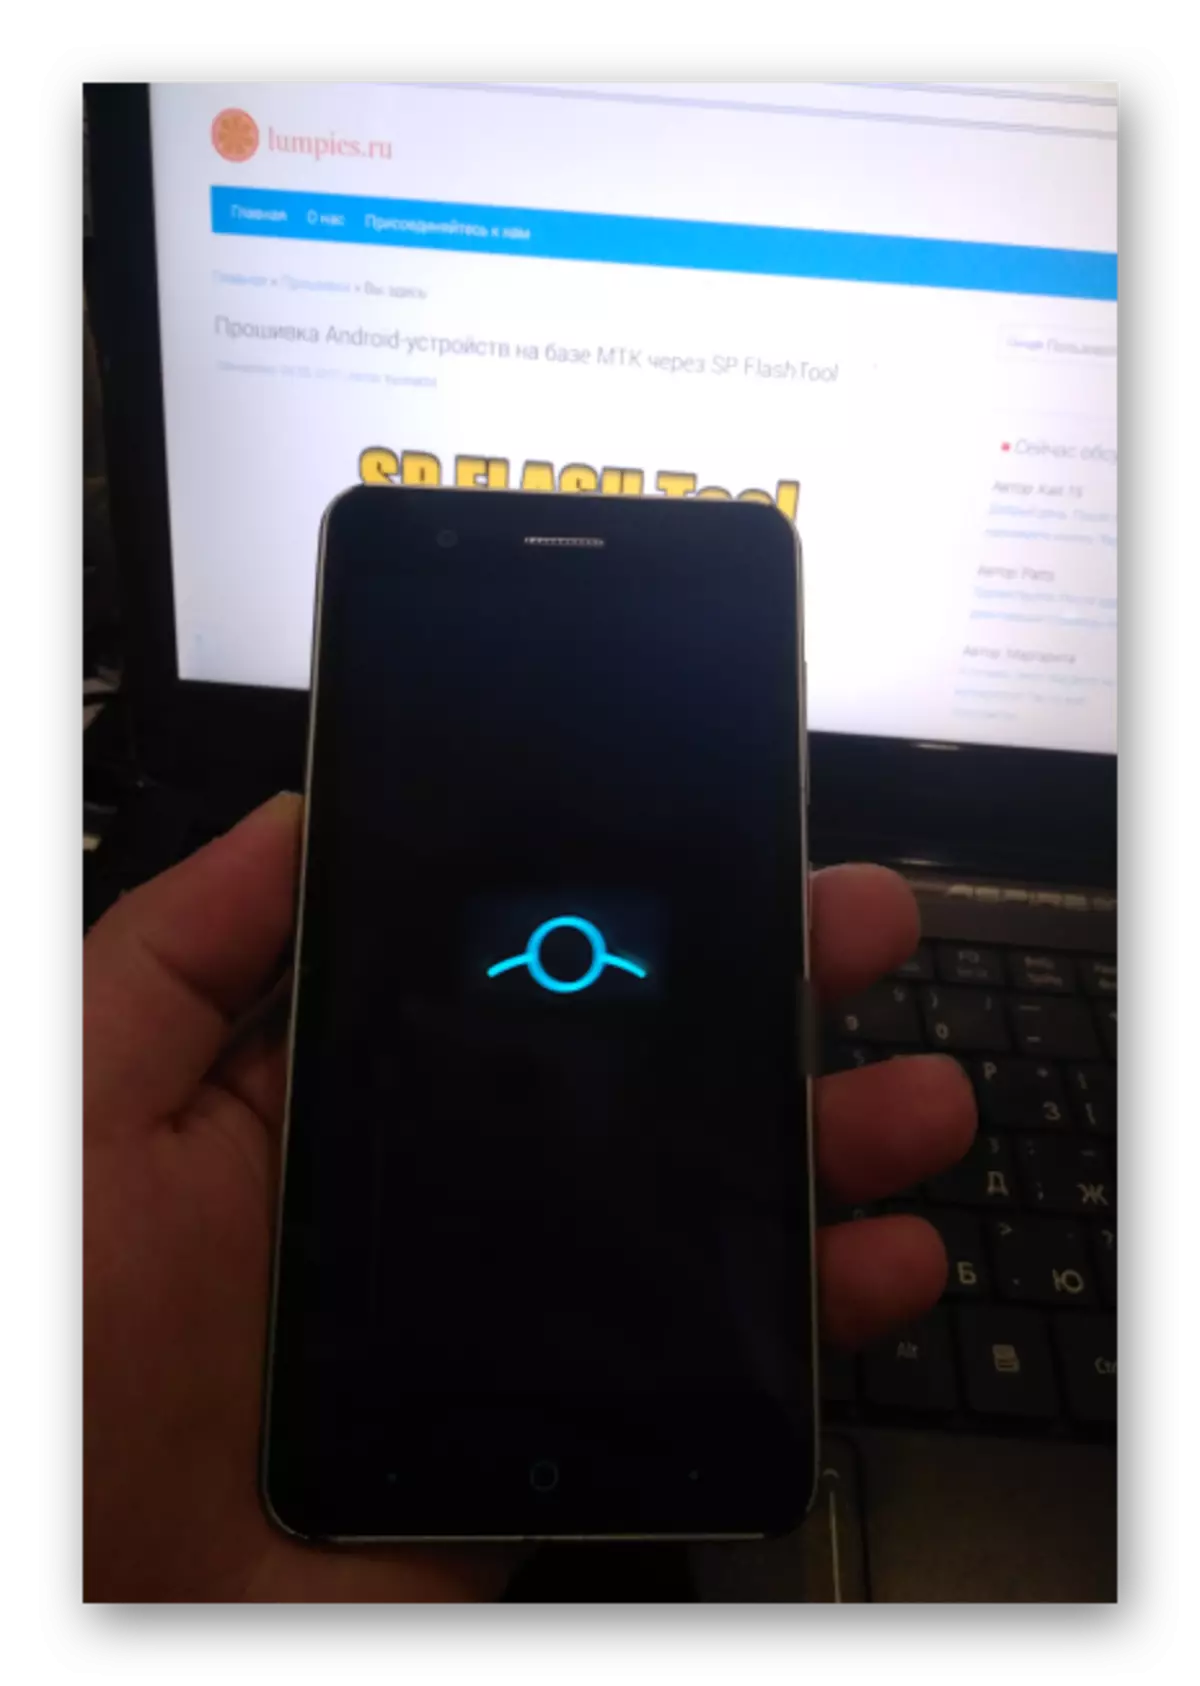 ZTE Blade A510 Loading LineageOs 14 is ongeveer 15 minute